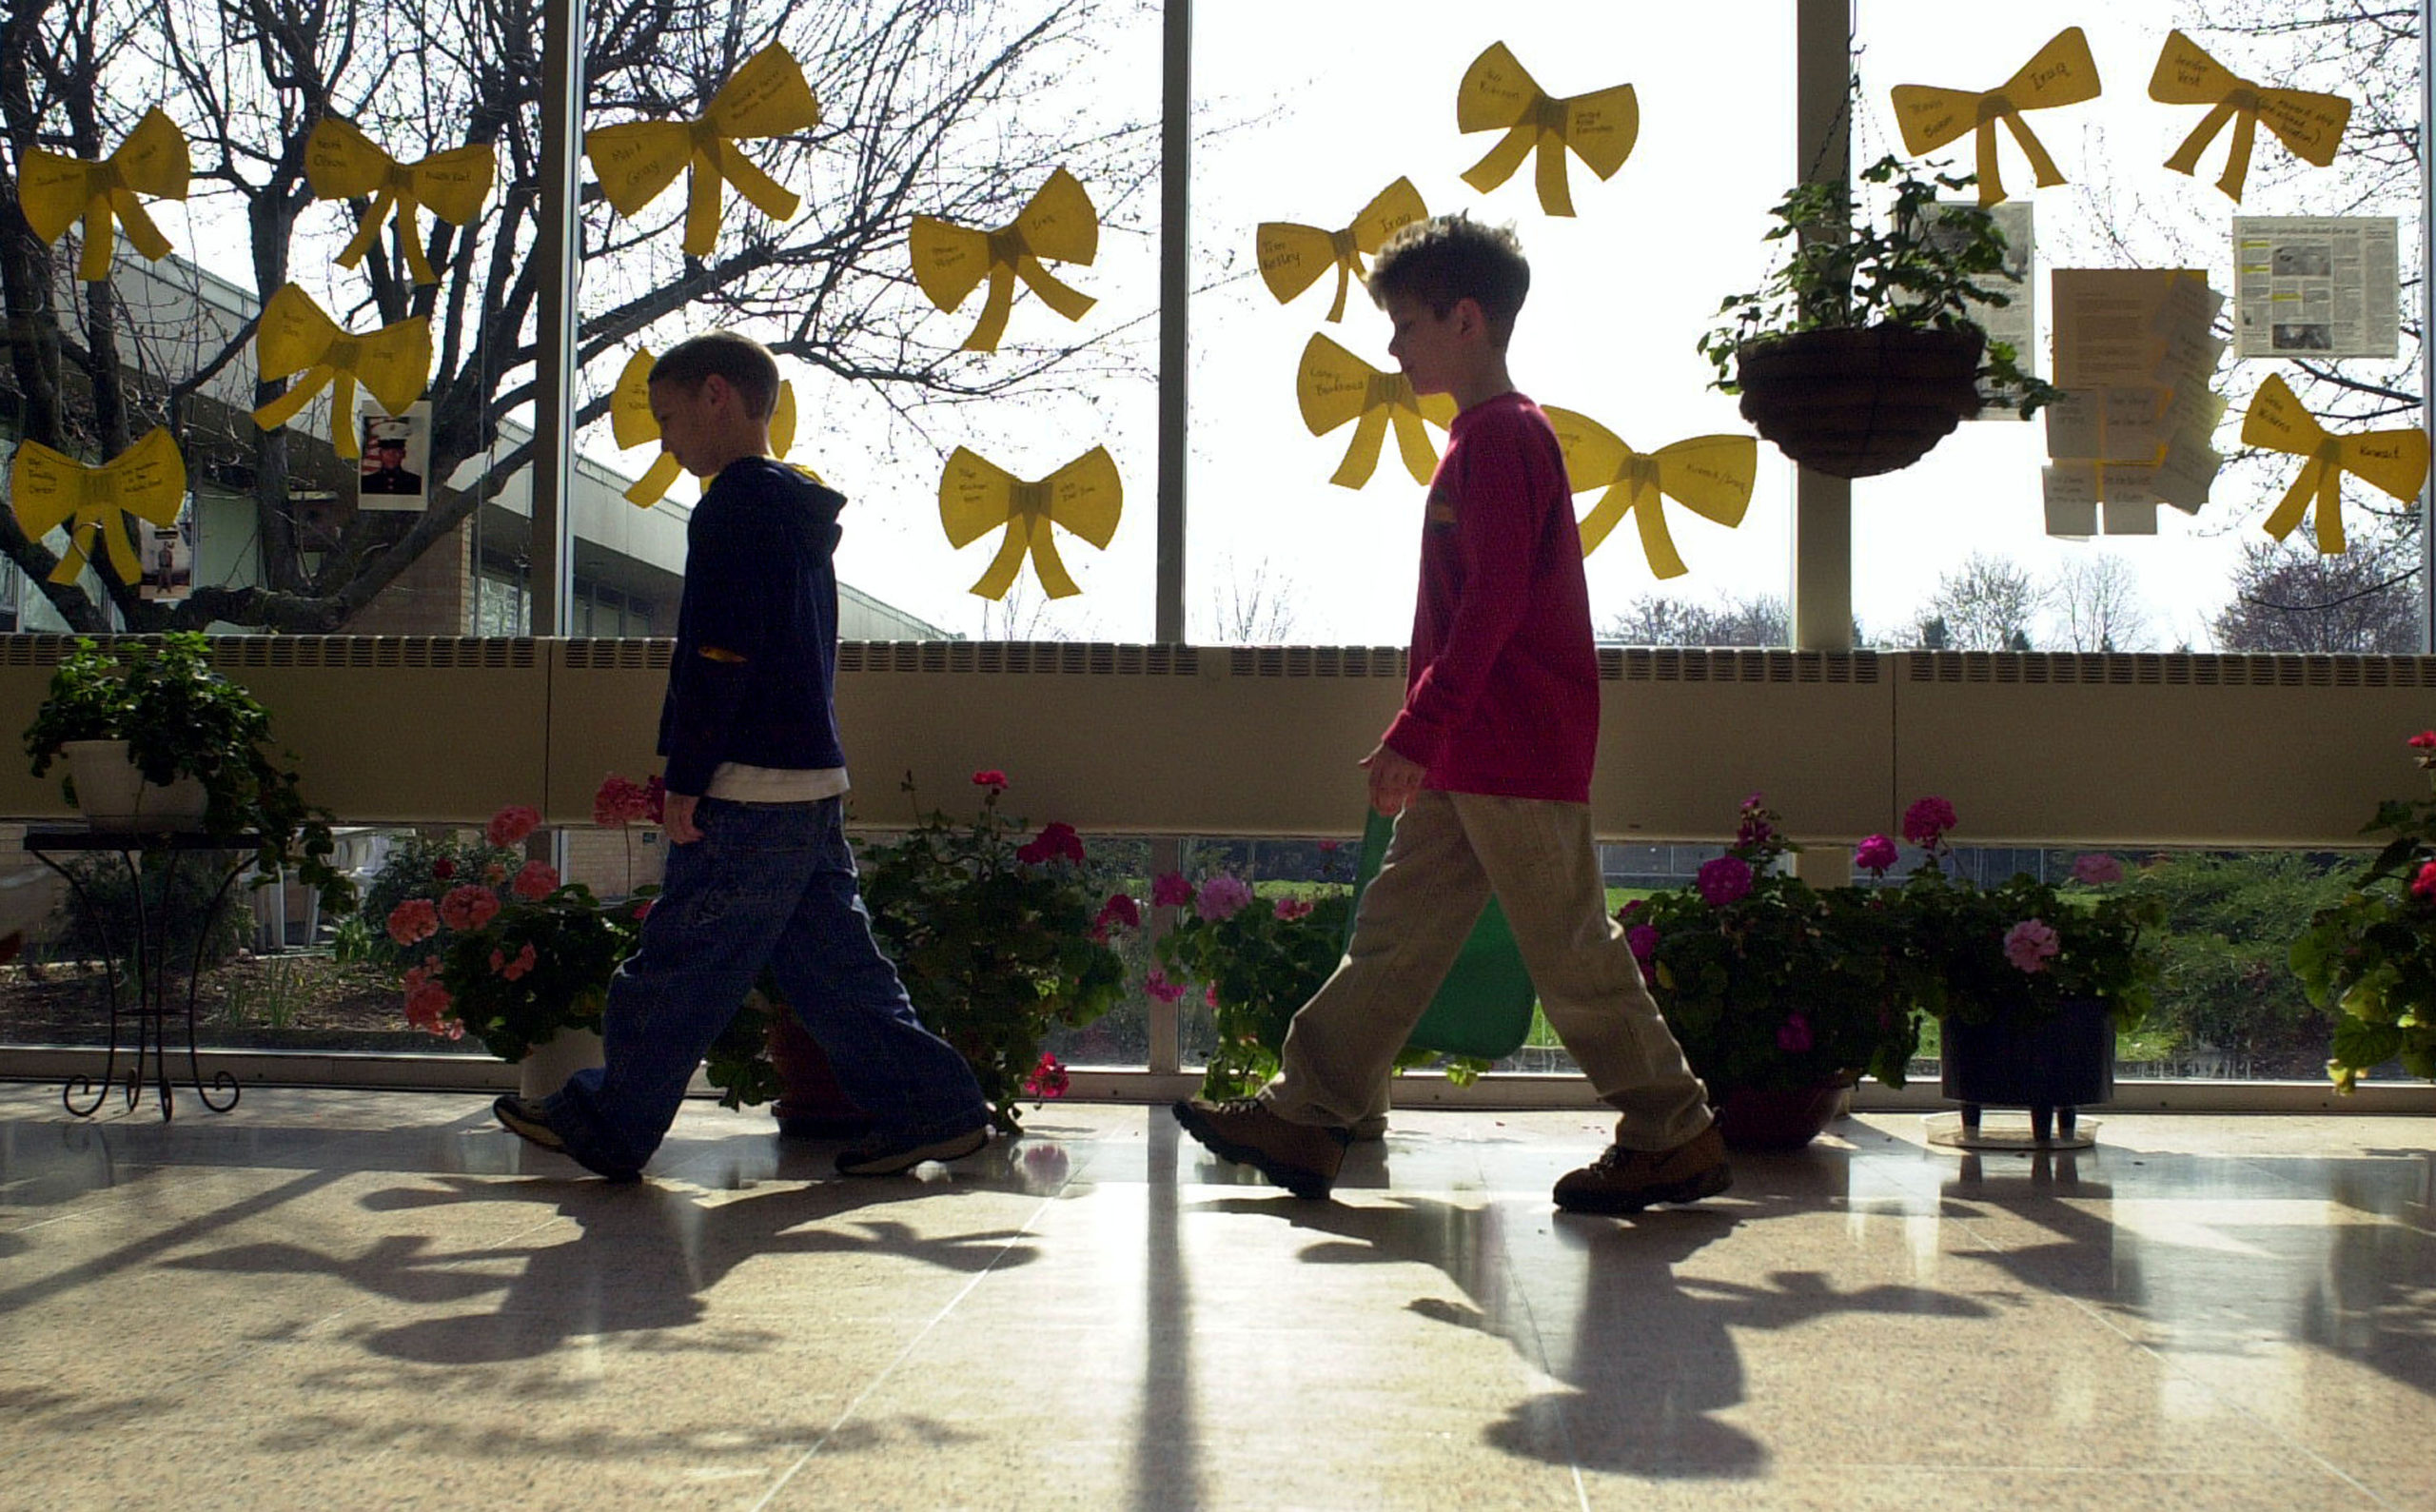 Students walk past yellow ribbons taped to windows at Longstreth Elementary School in support of military family members involved in the U.S.-led war with Iraq April 2, 2003 in Warminster, Pennsylvania. The cards will be taken home to the students' parents to be sent to the military family members through the USO. One third of the student population at Longstreth has a family member in a U.S. military service stationed at the Willow Grove Naval Air Station in Horsham, Pennsylvania. (Photo by William Thomas Cain/Getty Images)